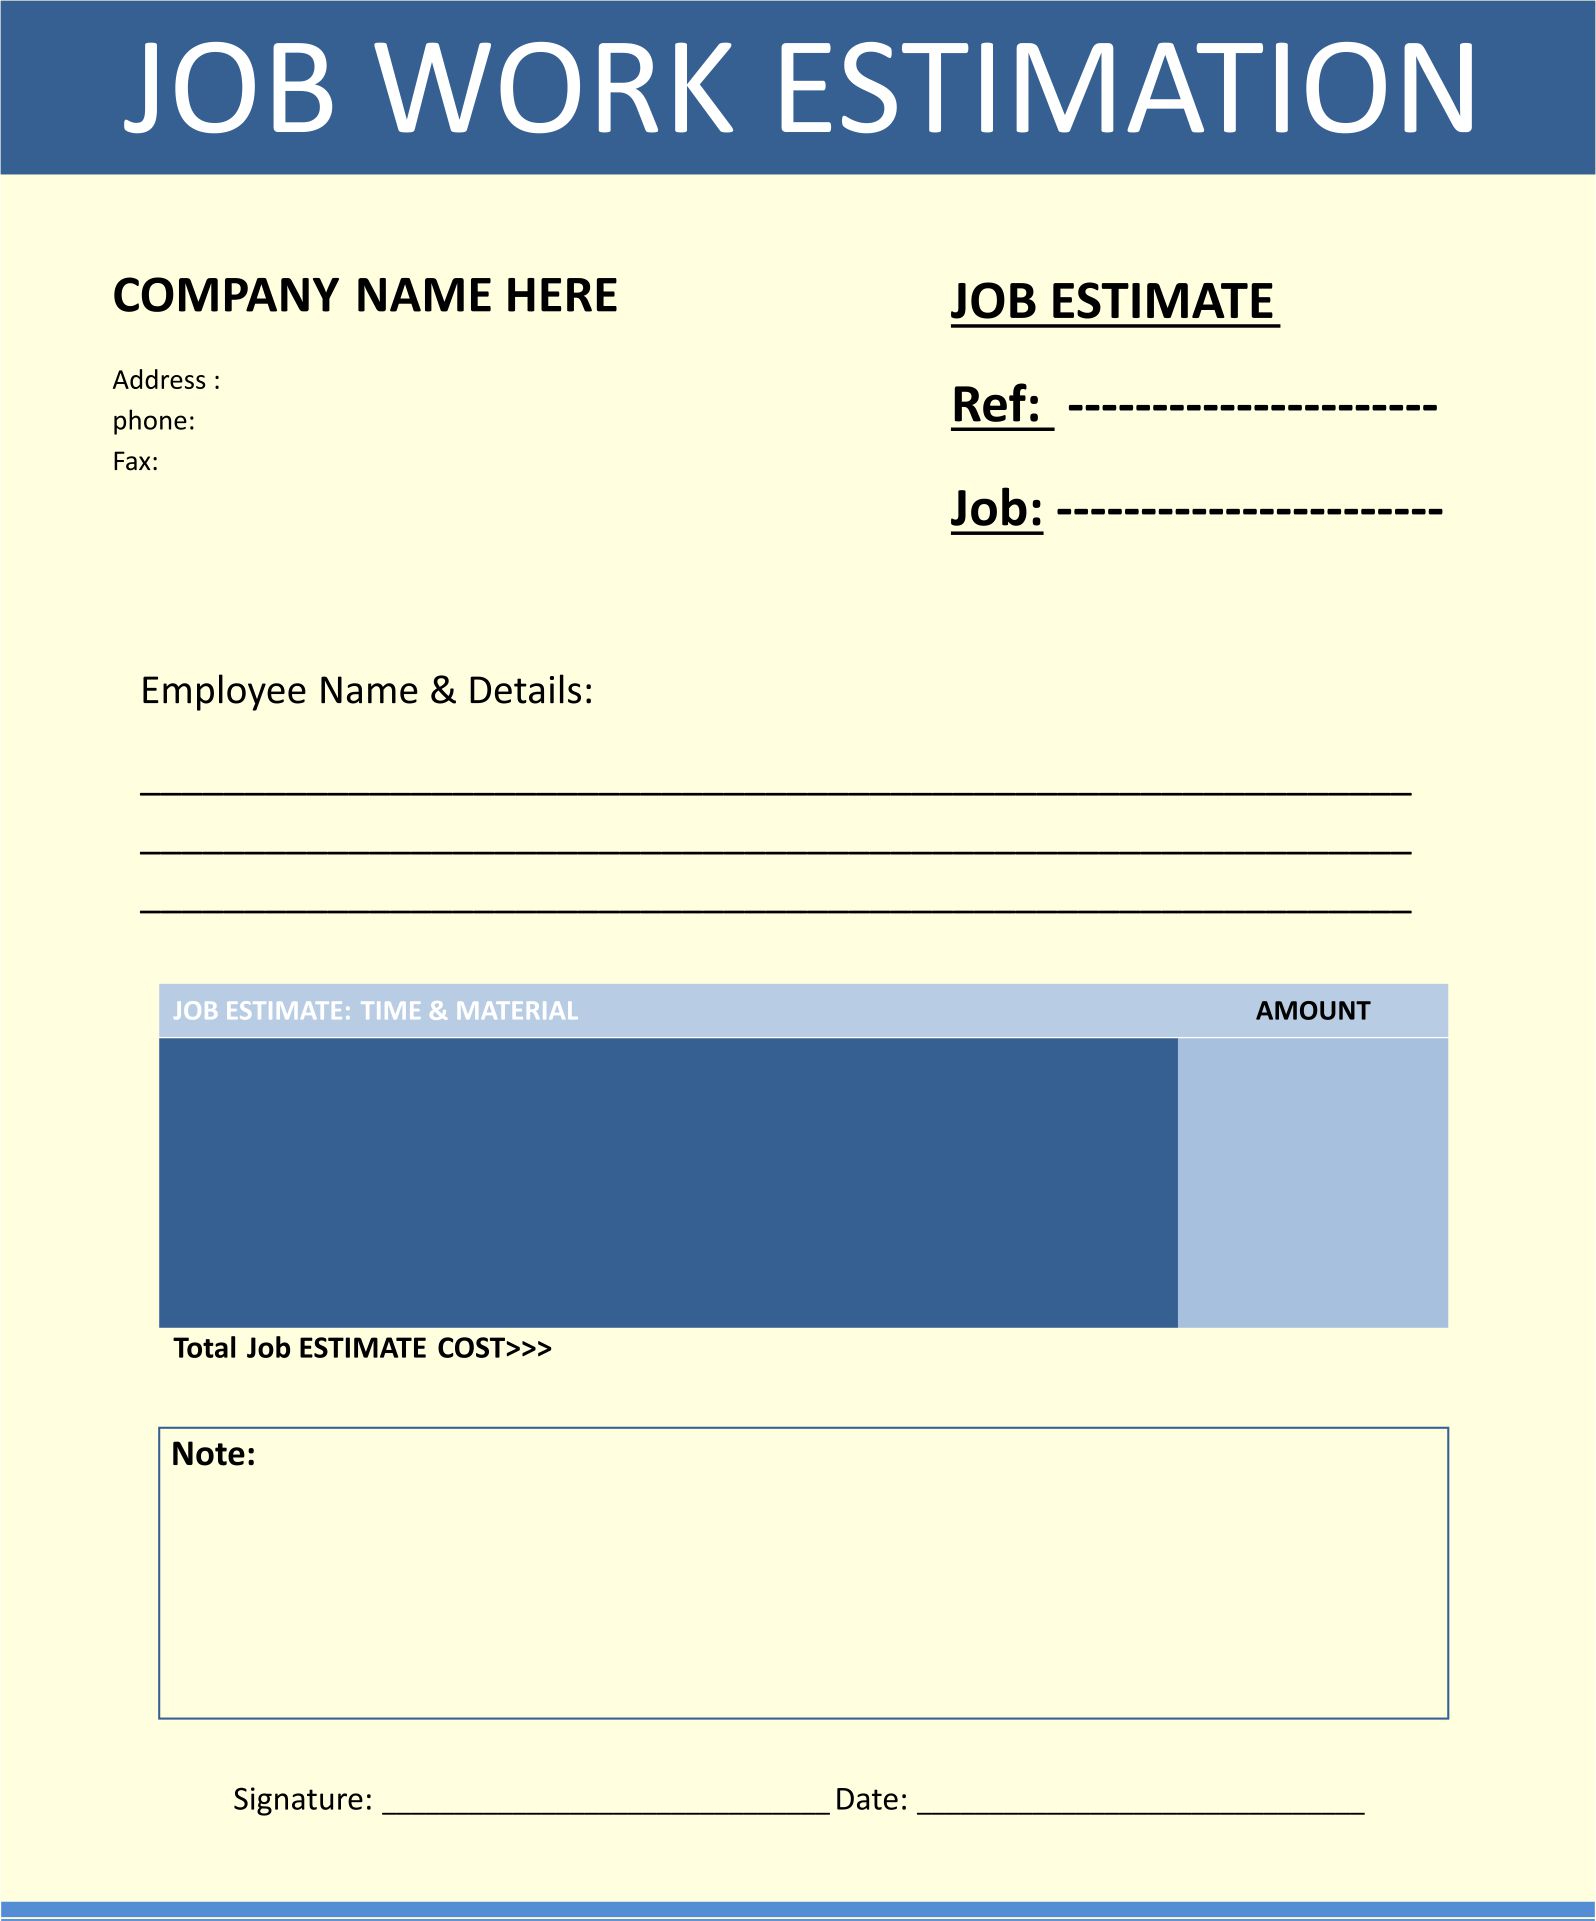 contractor-free-printable-estimate-forms-printable-forms-free-online